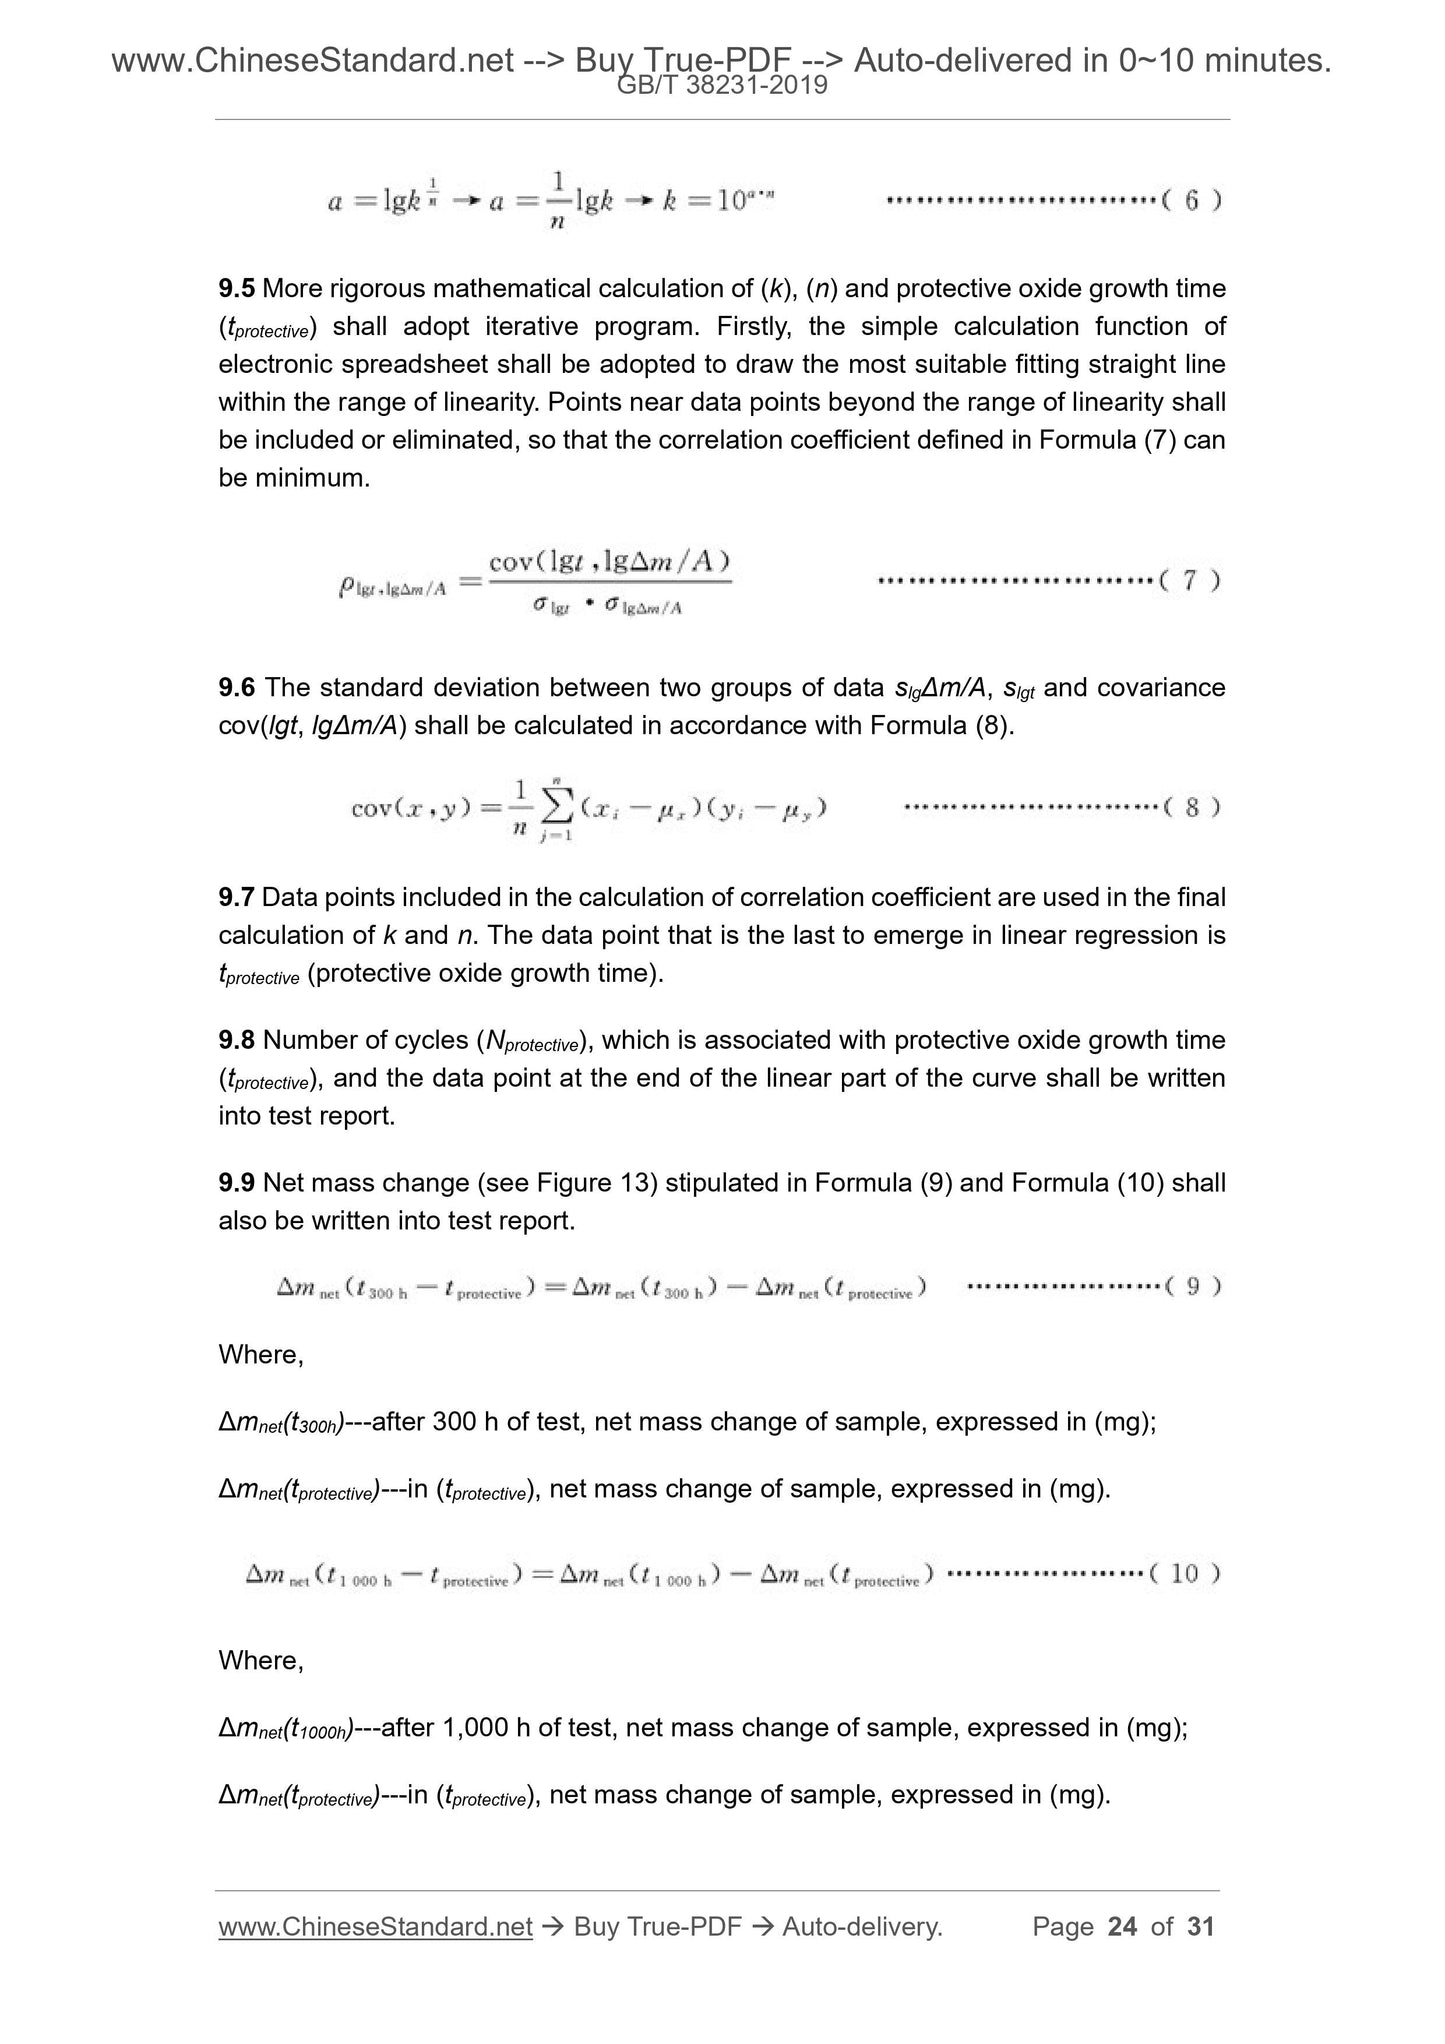 GB/T 38231-2019 Page 9